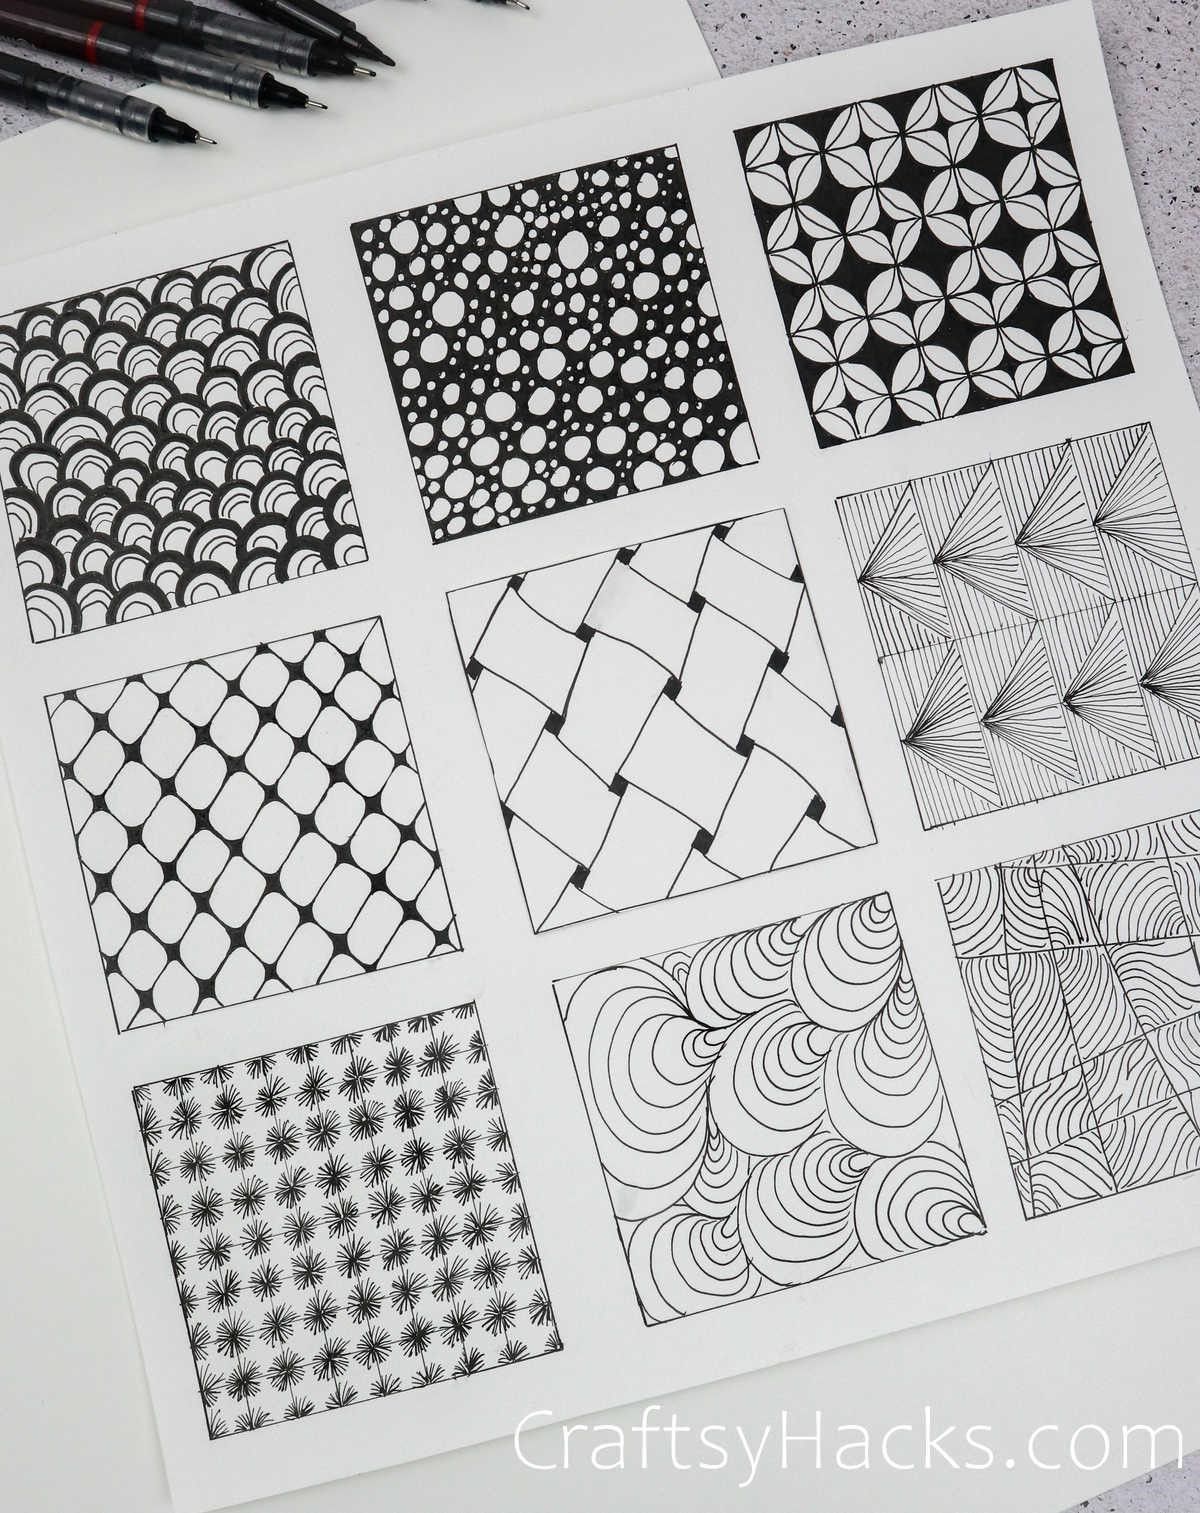 Easy Patterns to Draw – 35 Pattern Ideas for Drawing